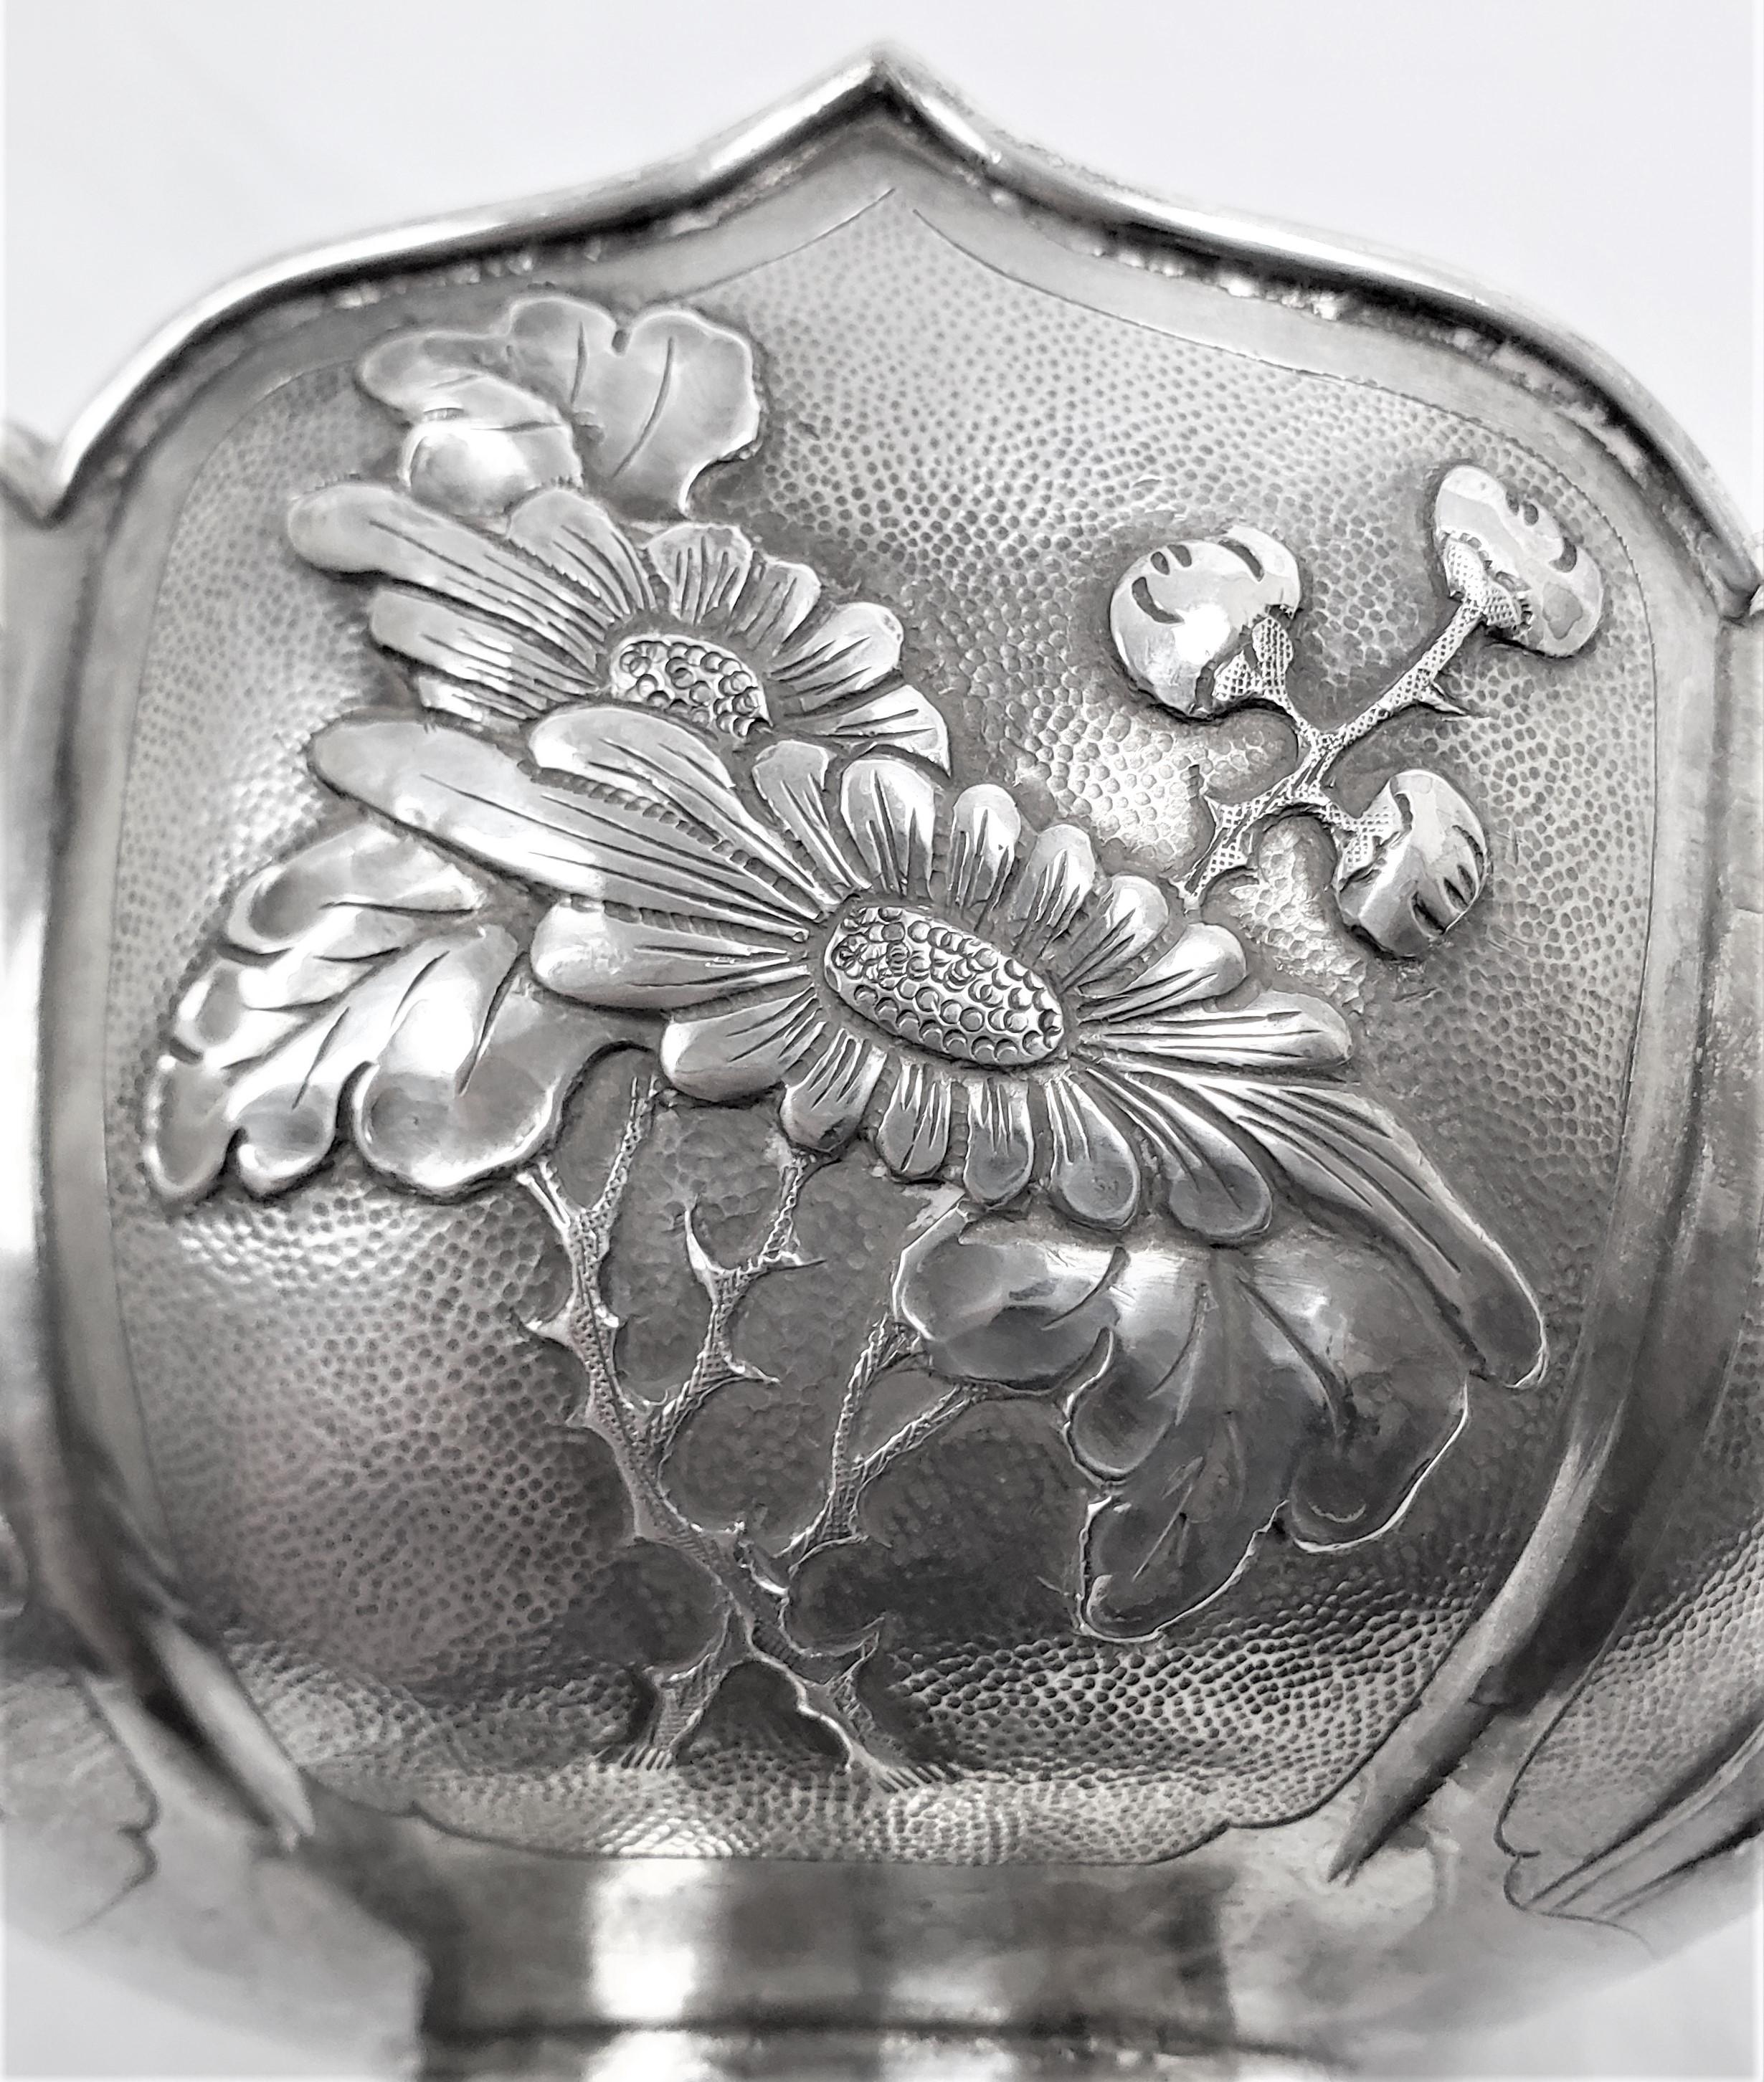 Zee Sung Signed Chinese Export Antique Chased Silver Presentation Bowl & Stand For Sale 8